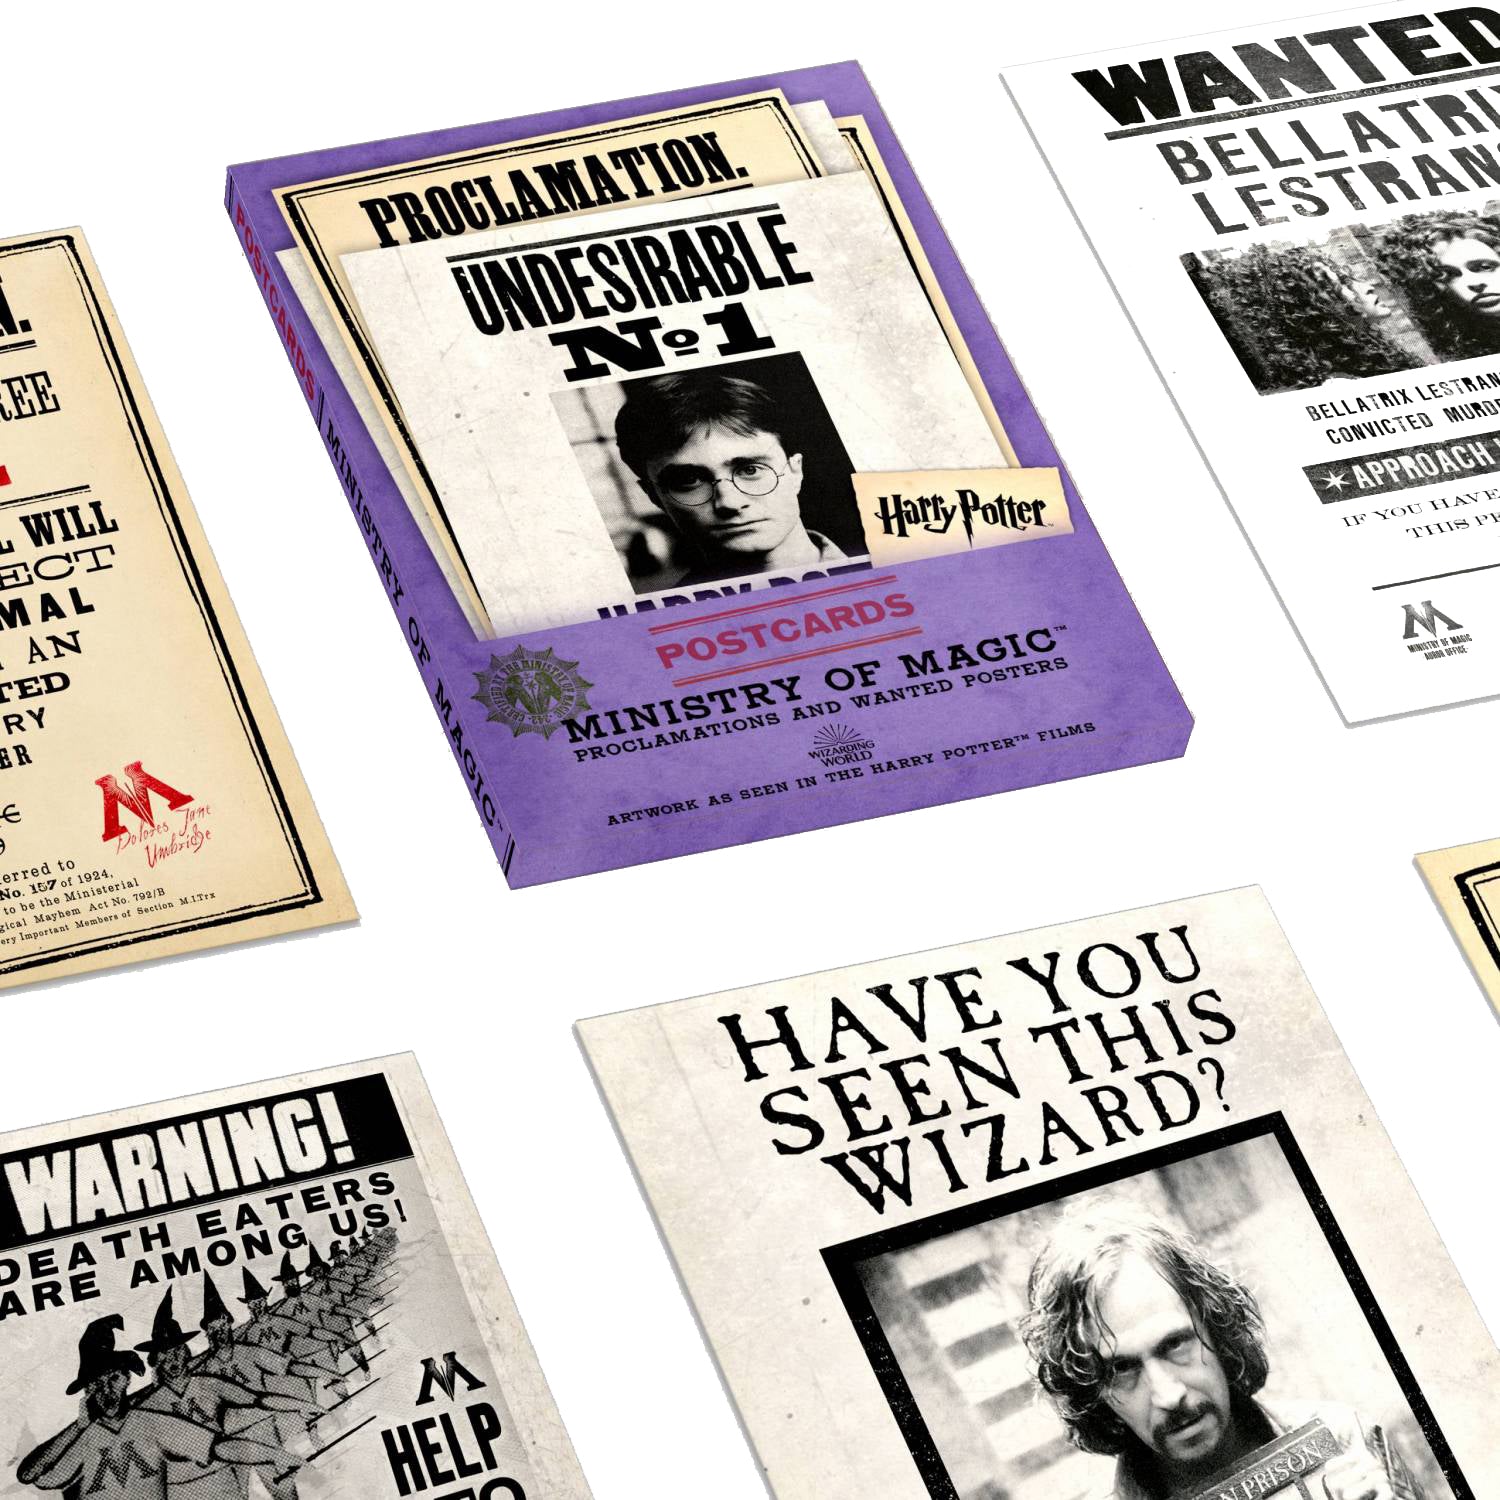 Ministry of Magic Postcards - Proclamations & Wanted Posters Series